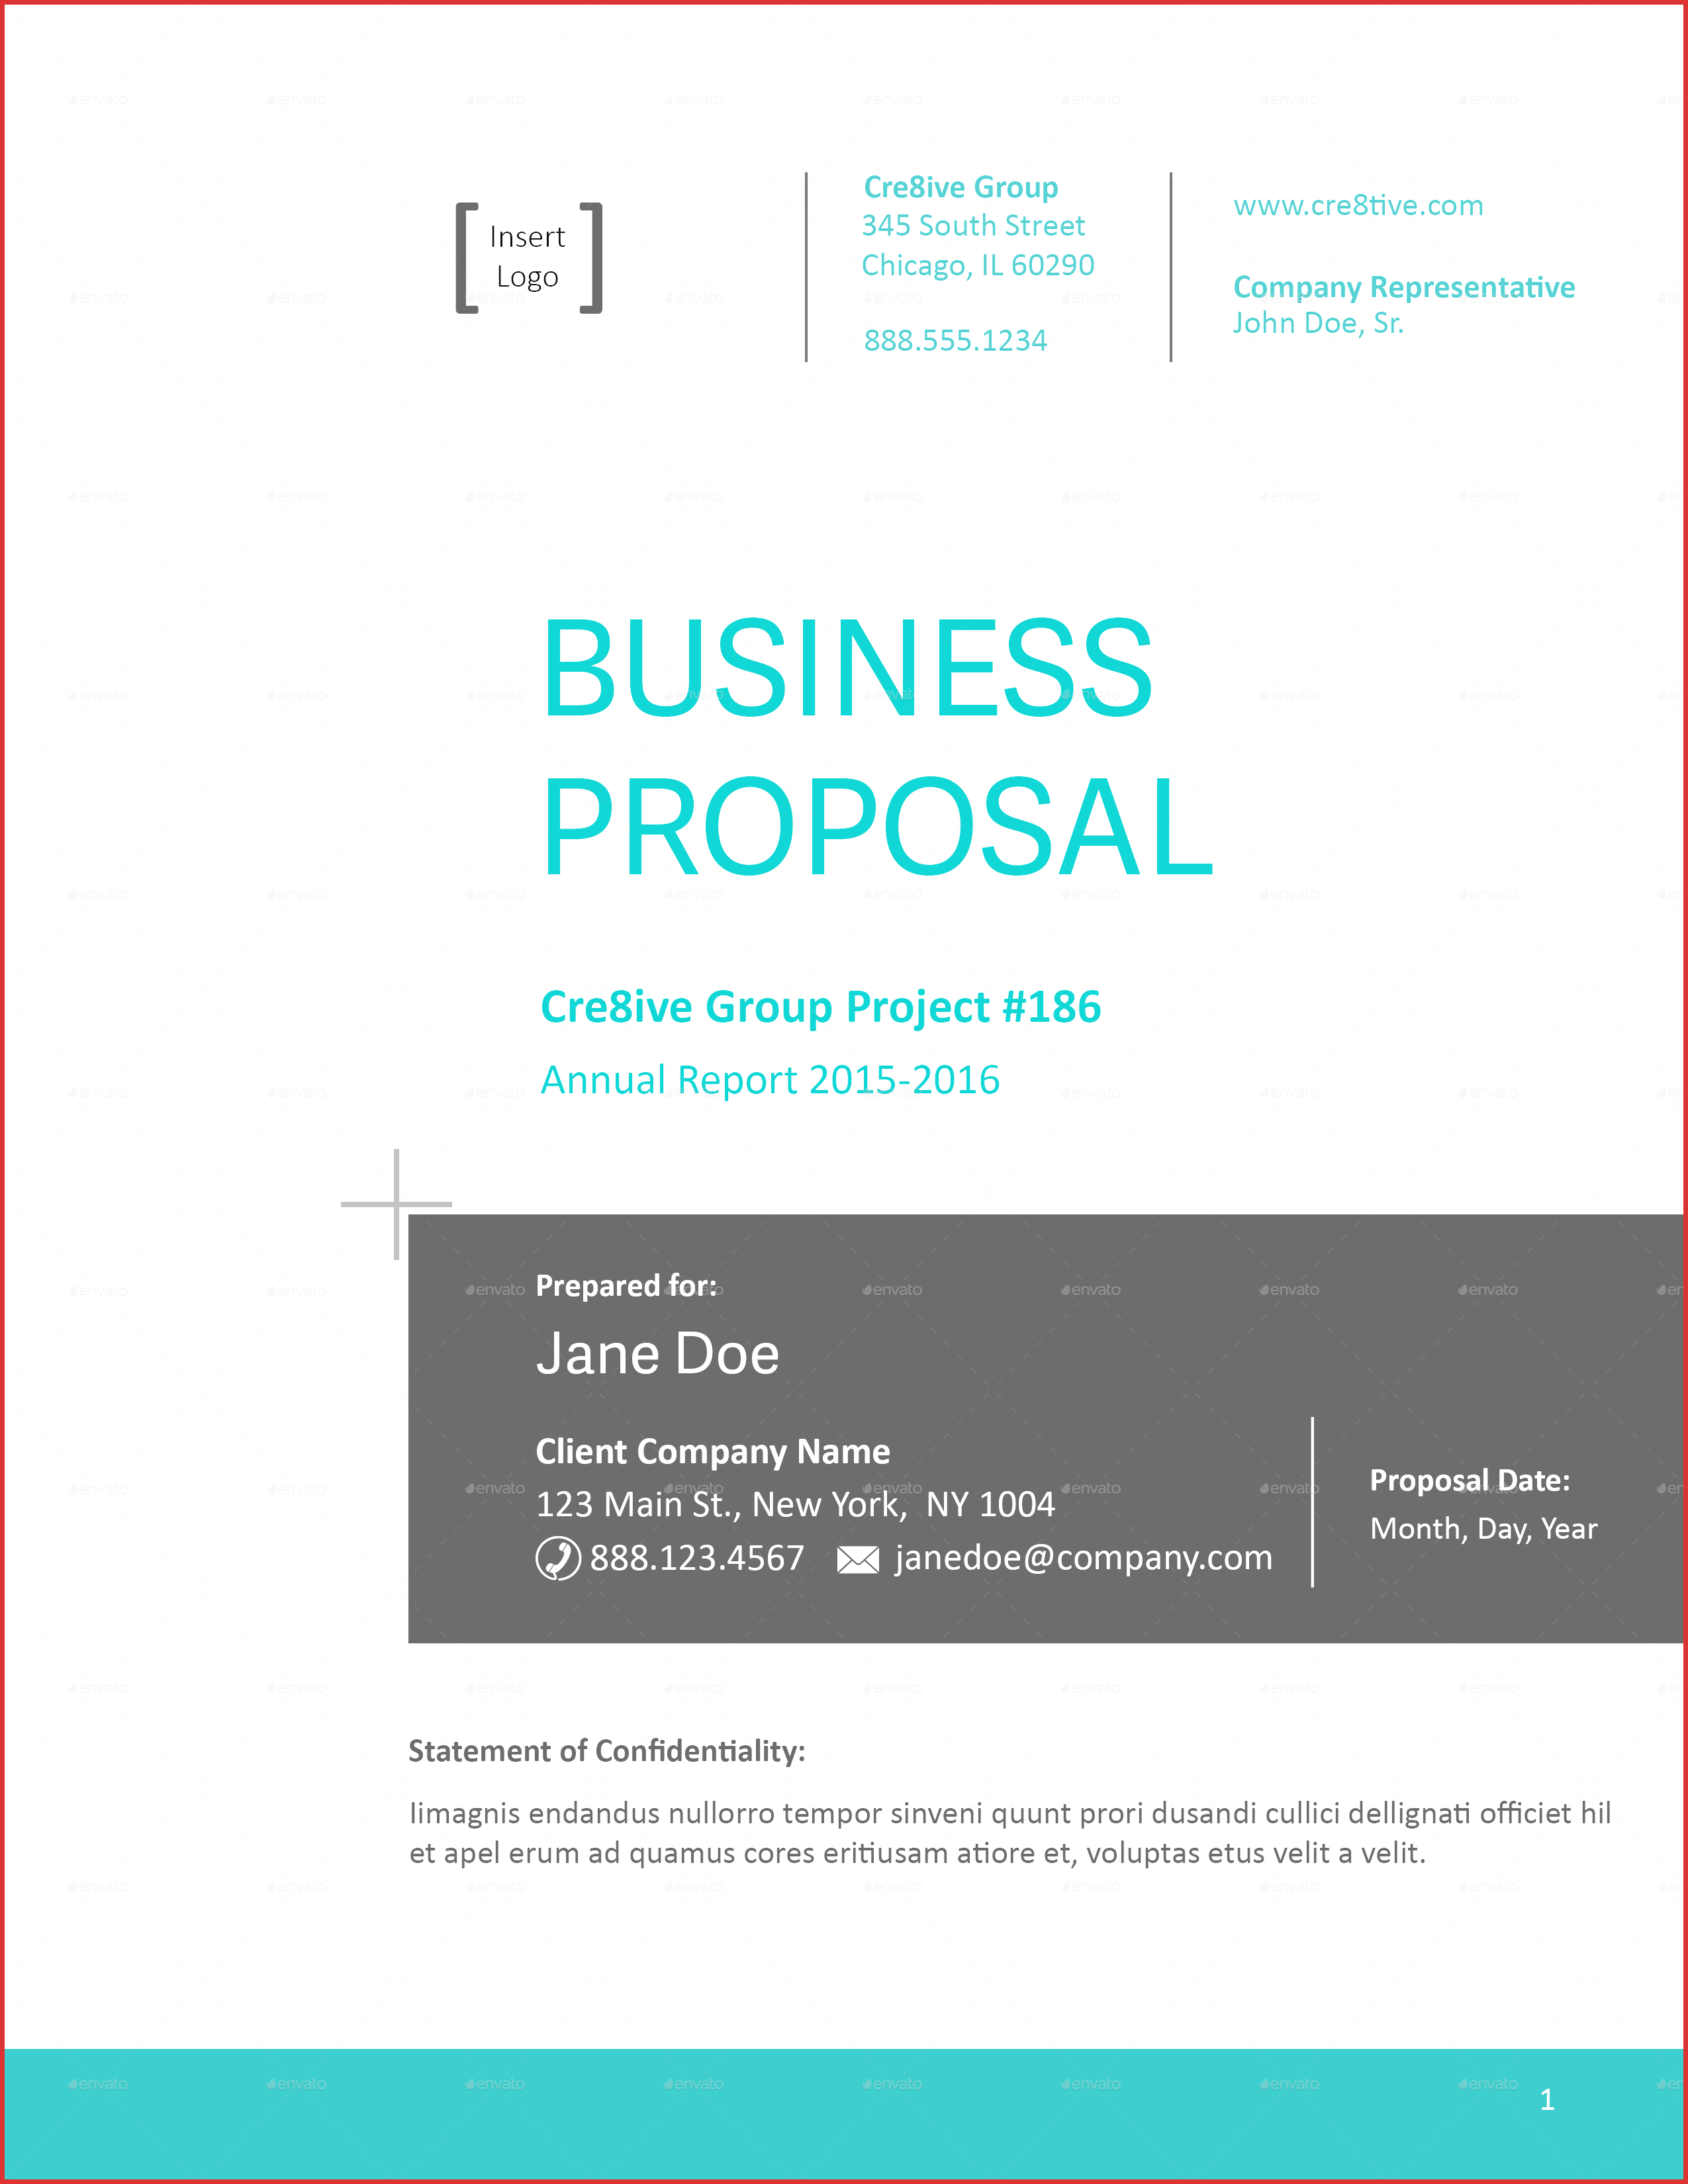 Business Proposal Cover Sheet Letter Training Workbook Template 